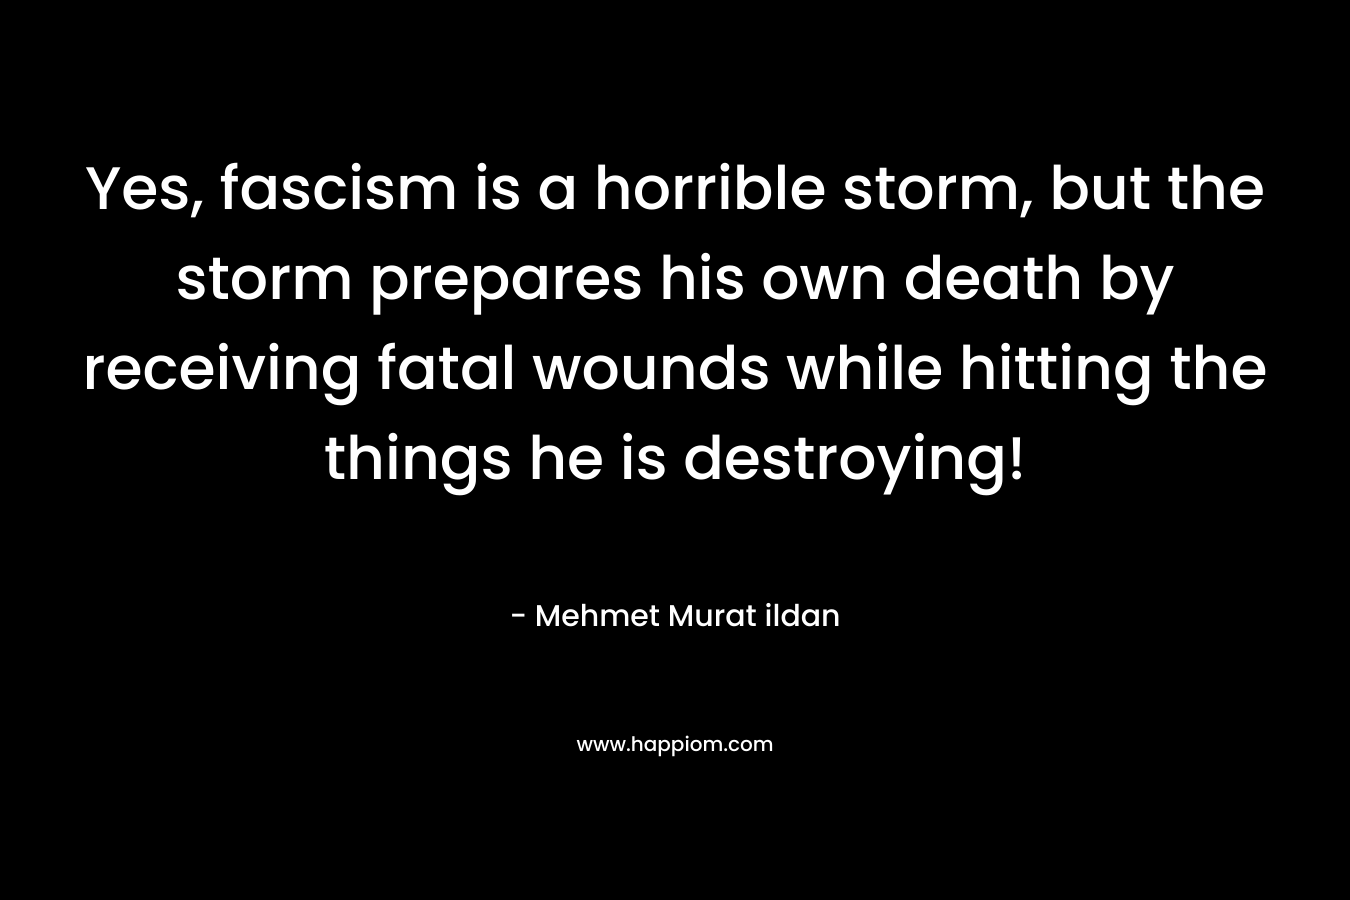 Yes, fascism is a horrible storm, but the storm prepares his own death by receiving fatal wounds while hitting the things he is destroying!